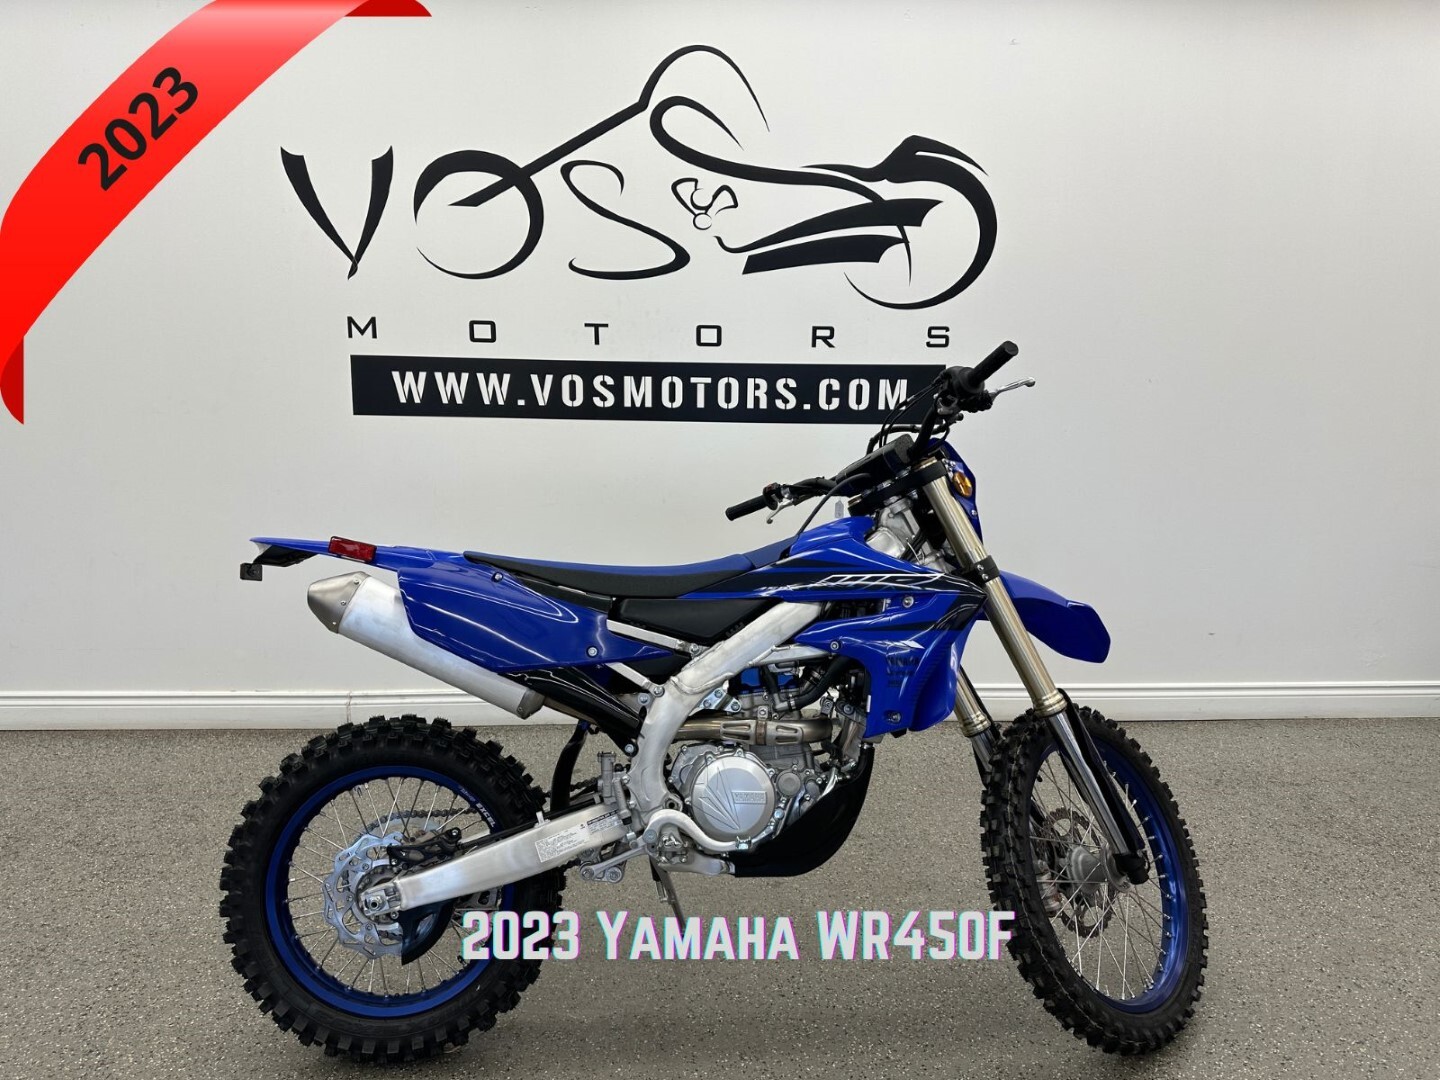 2023 Yamaha WR450FPL WR450F - V5332 - -No Payments for 1 Year**